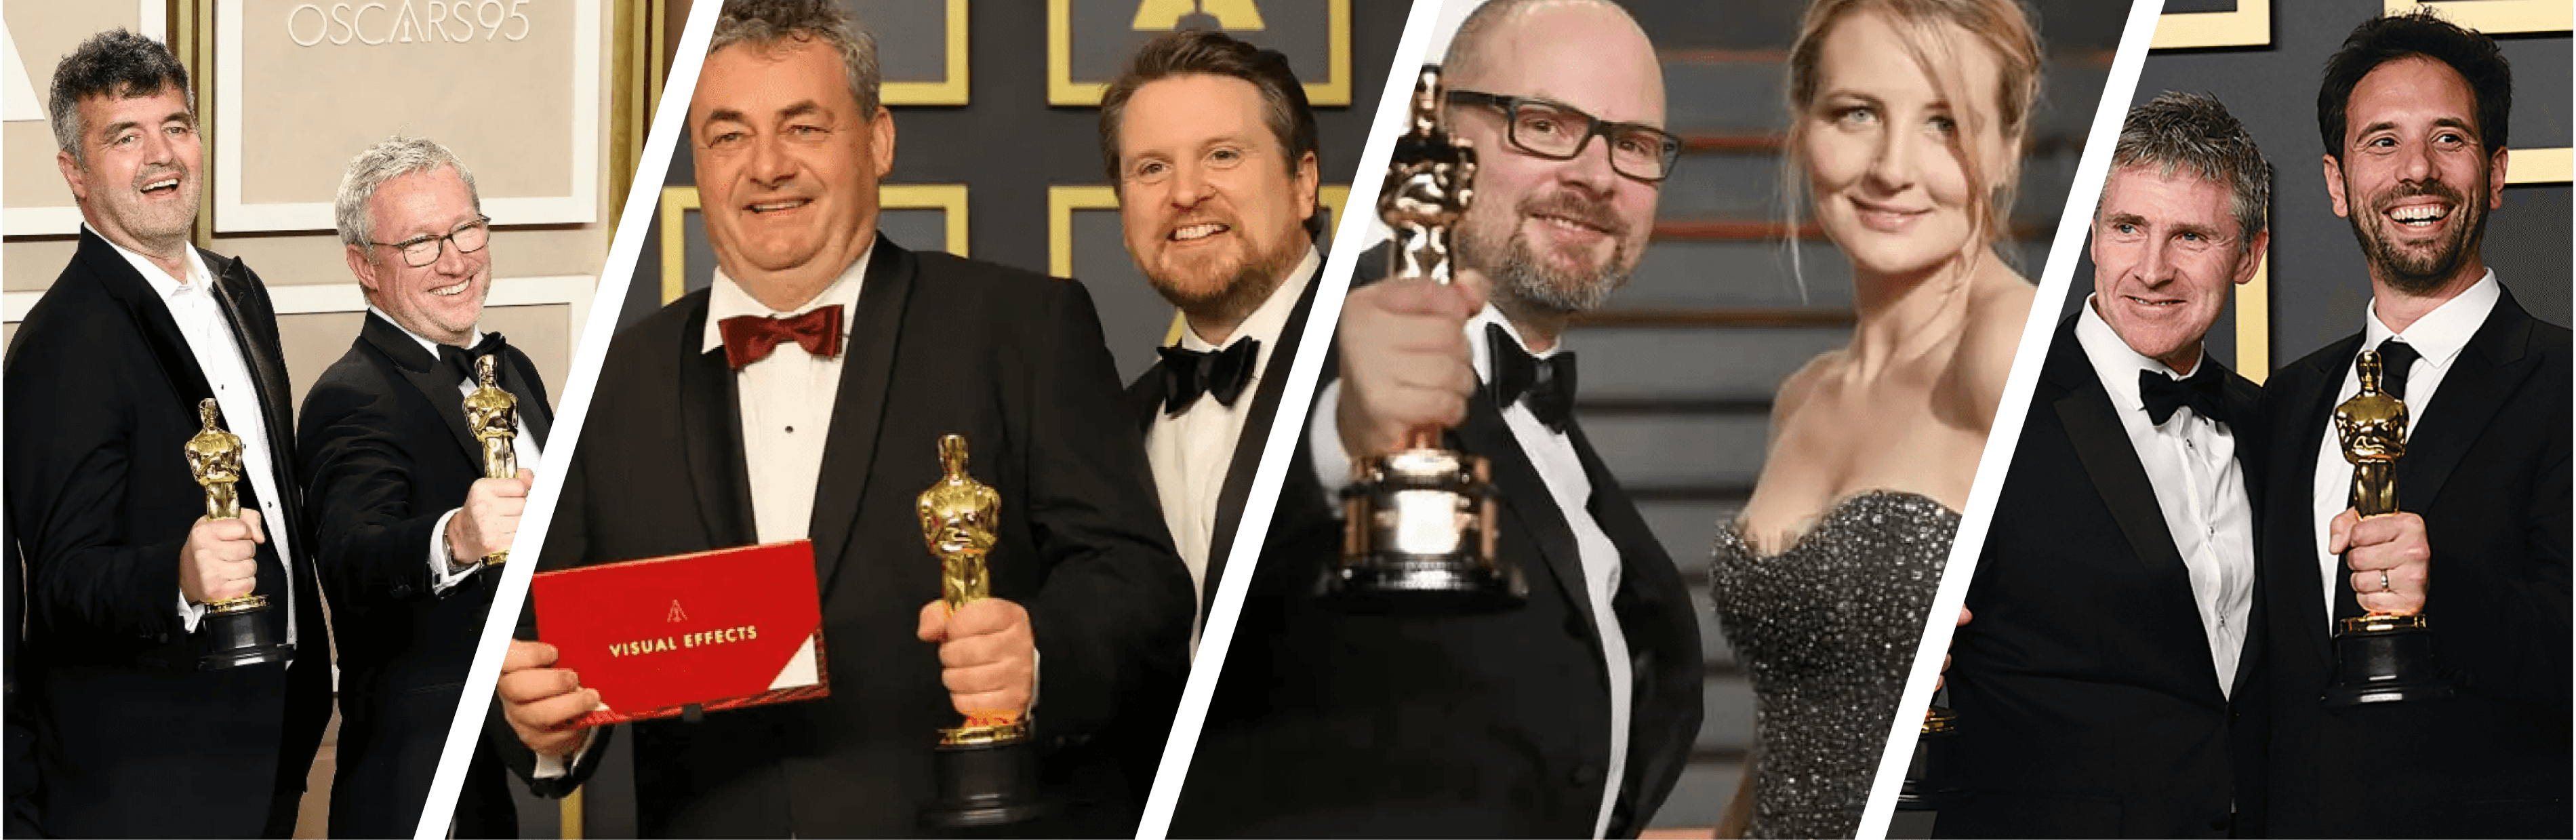 Photo depicts Oscar® winners from 2019-2023. Getty Images; Mike Coppola/Getty Images; Getty Images; David Lee/Big Idea